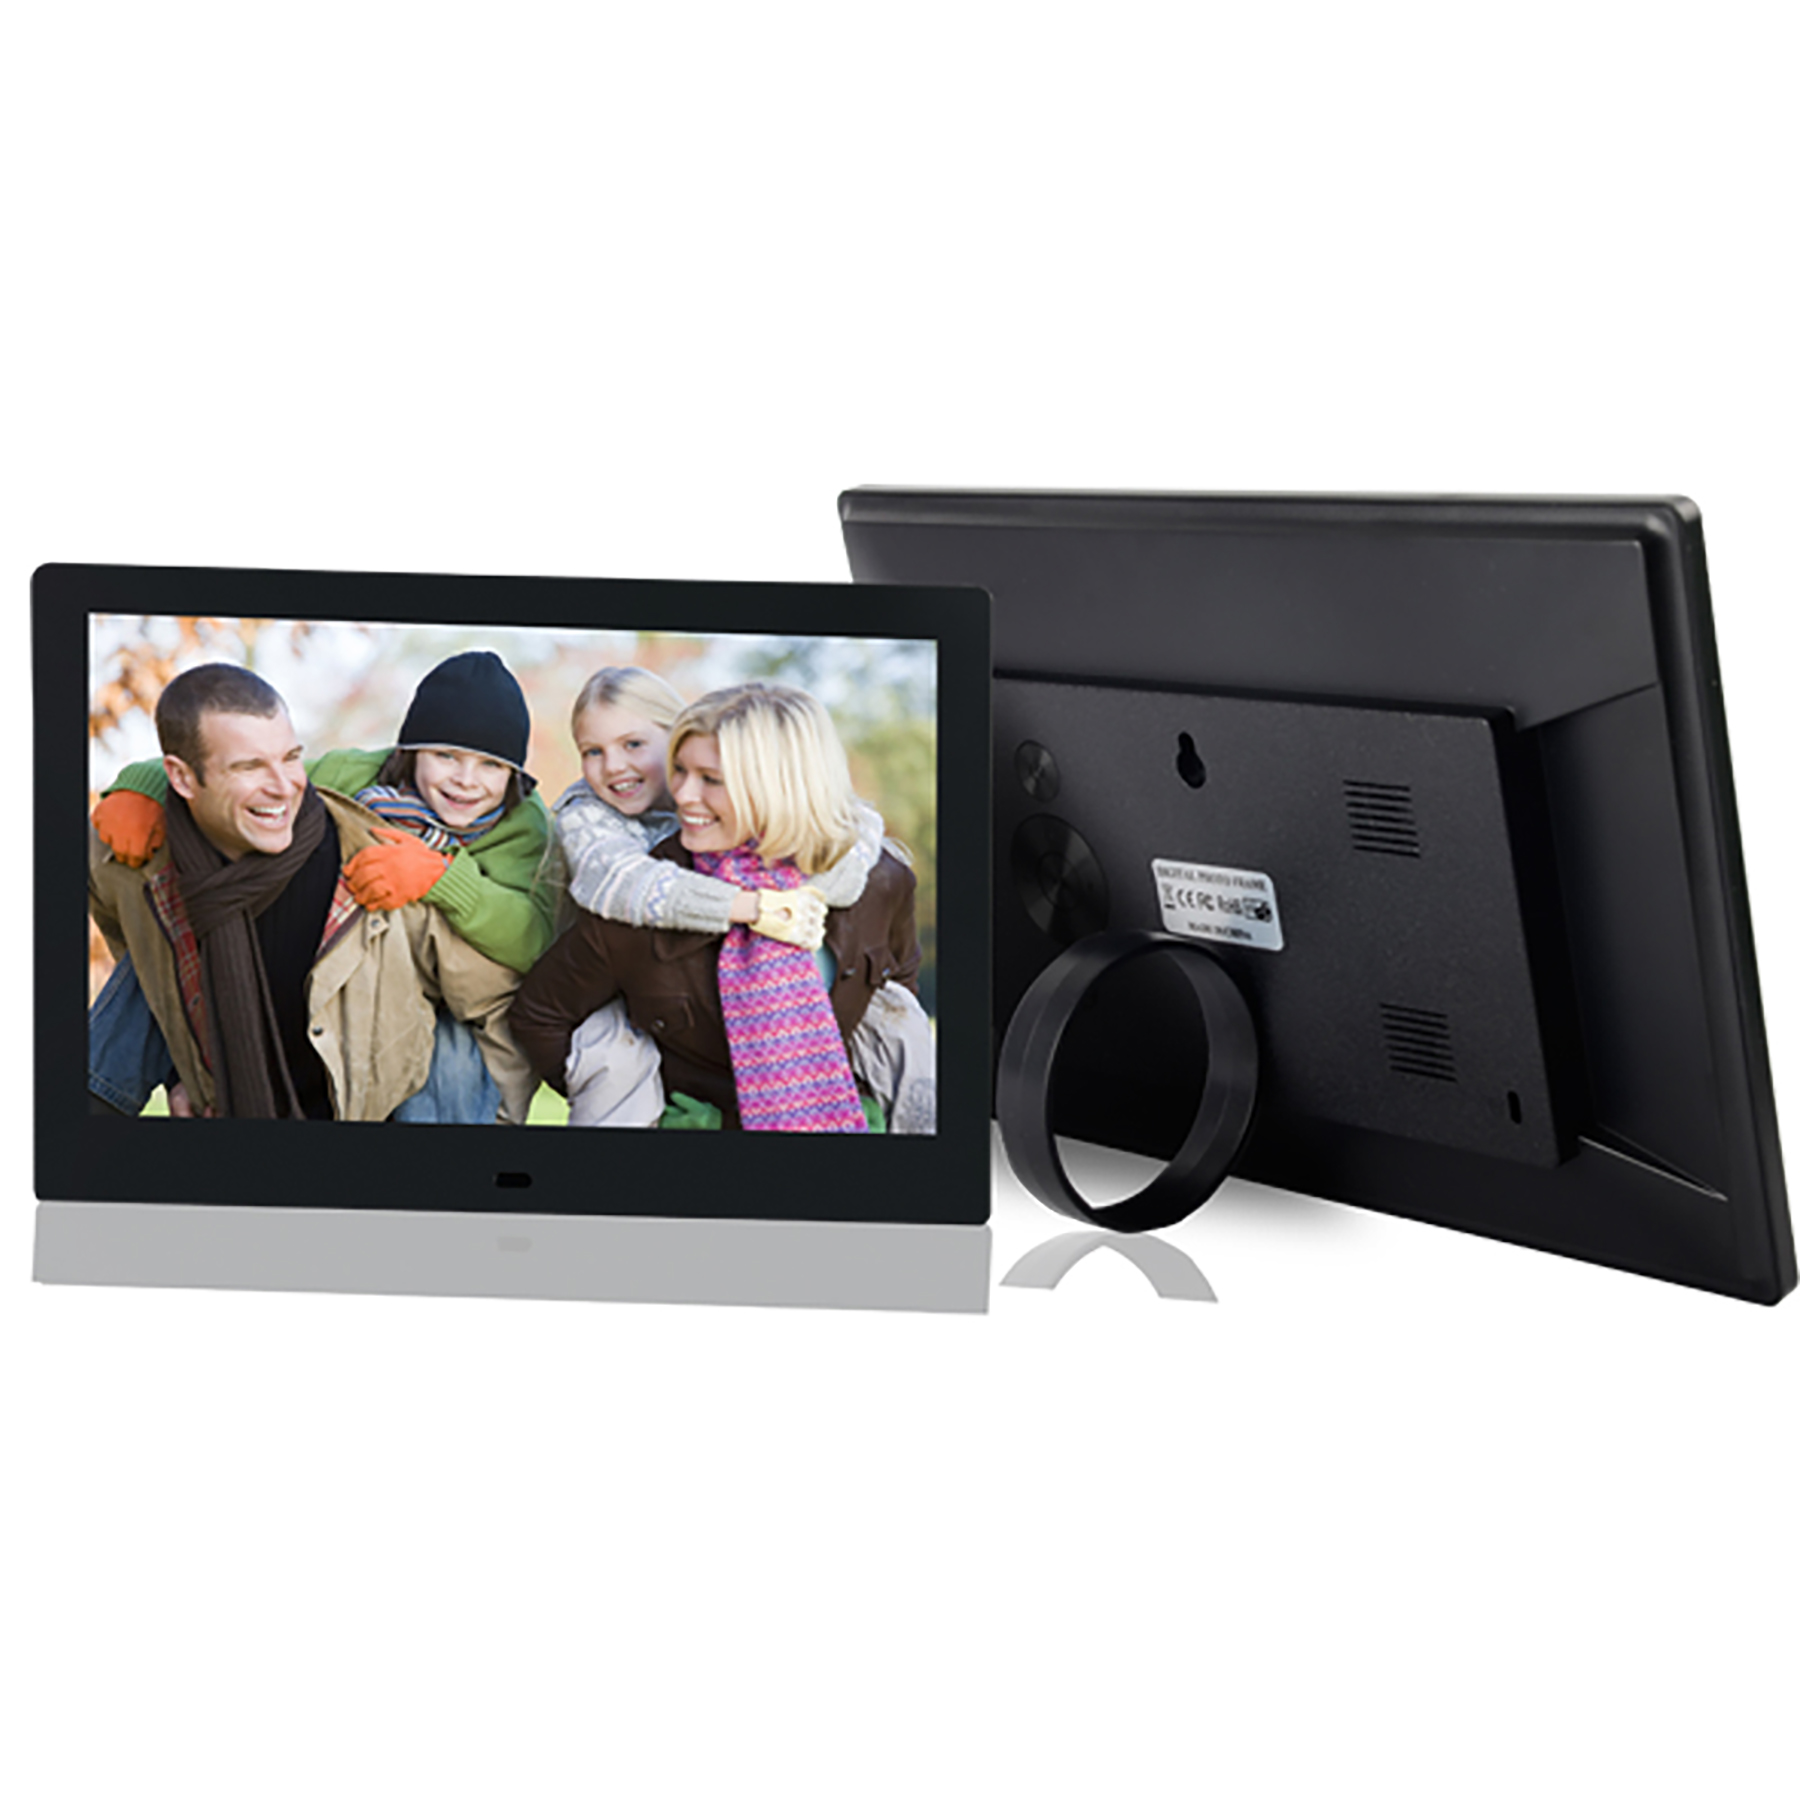 8" Digital Picture Frame and Audio / Video Player